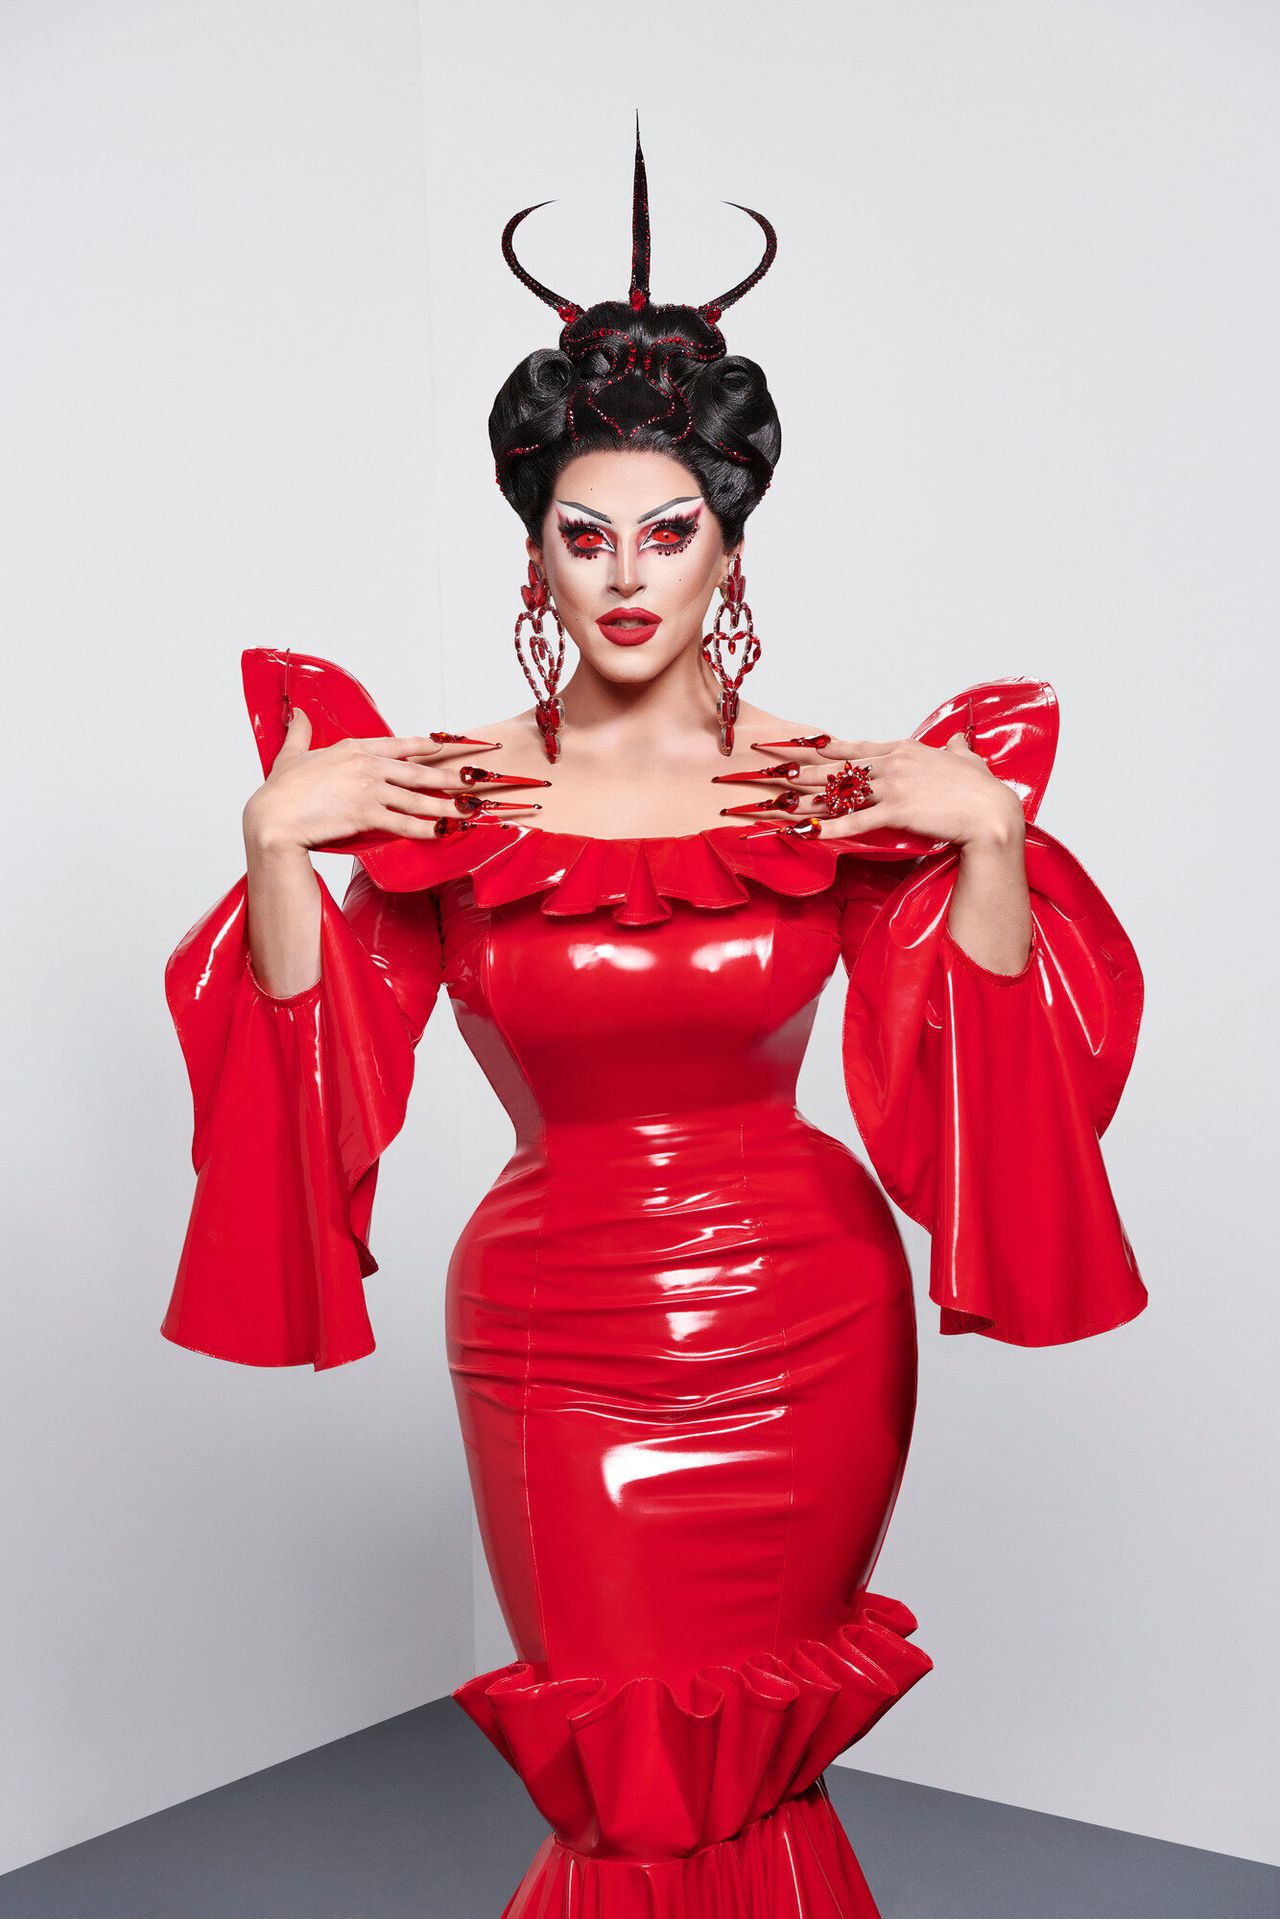 Cherry says her drag is more "dark" and "high-concept" away from Drag Race